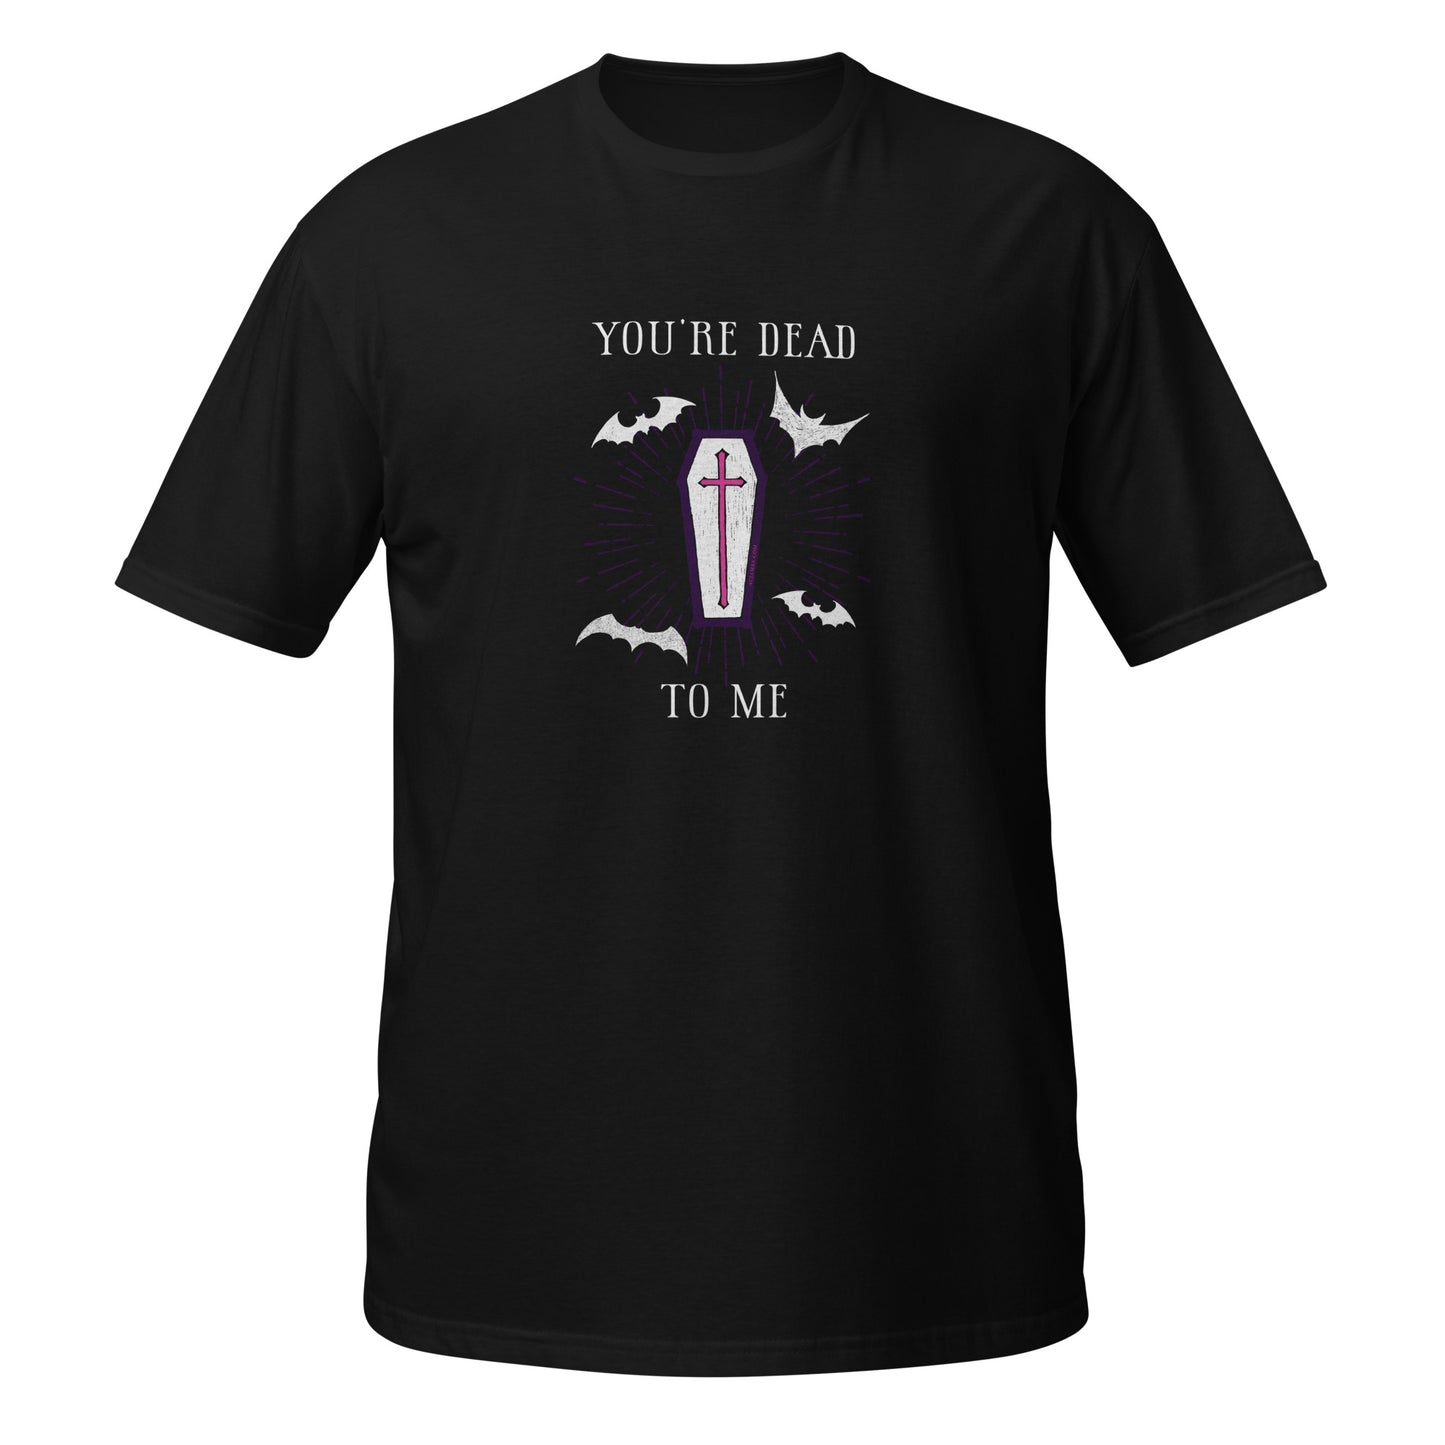 You're Dead To Me Short-Sleeve Unisex T-Shirt